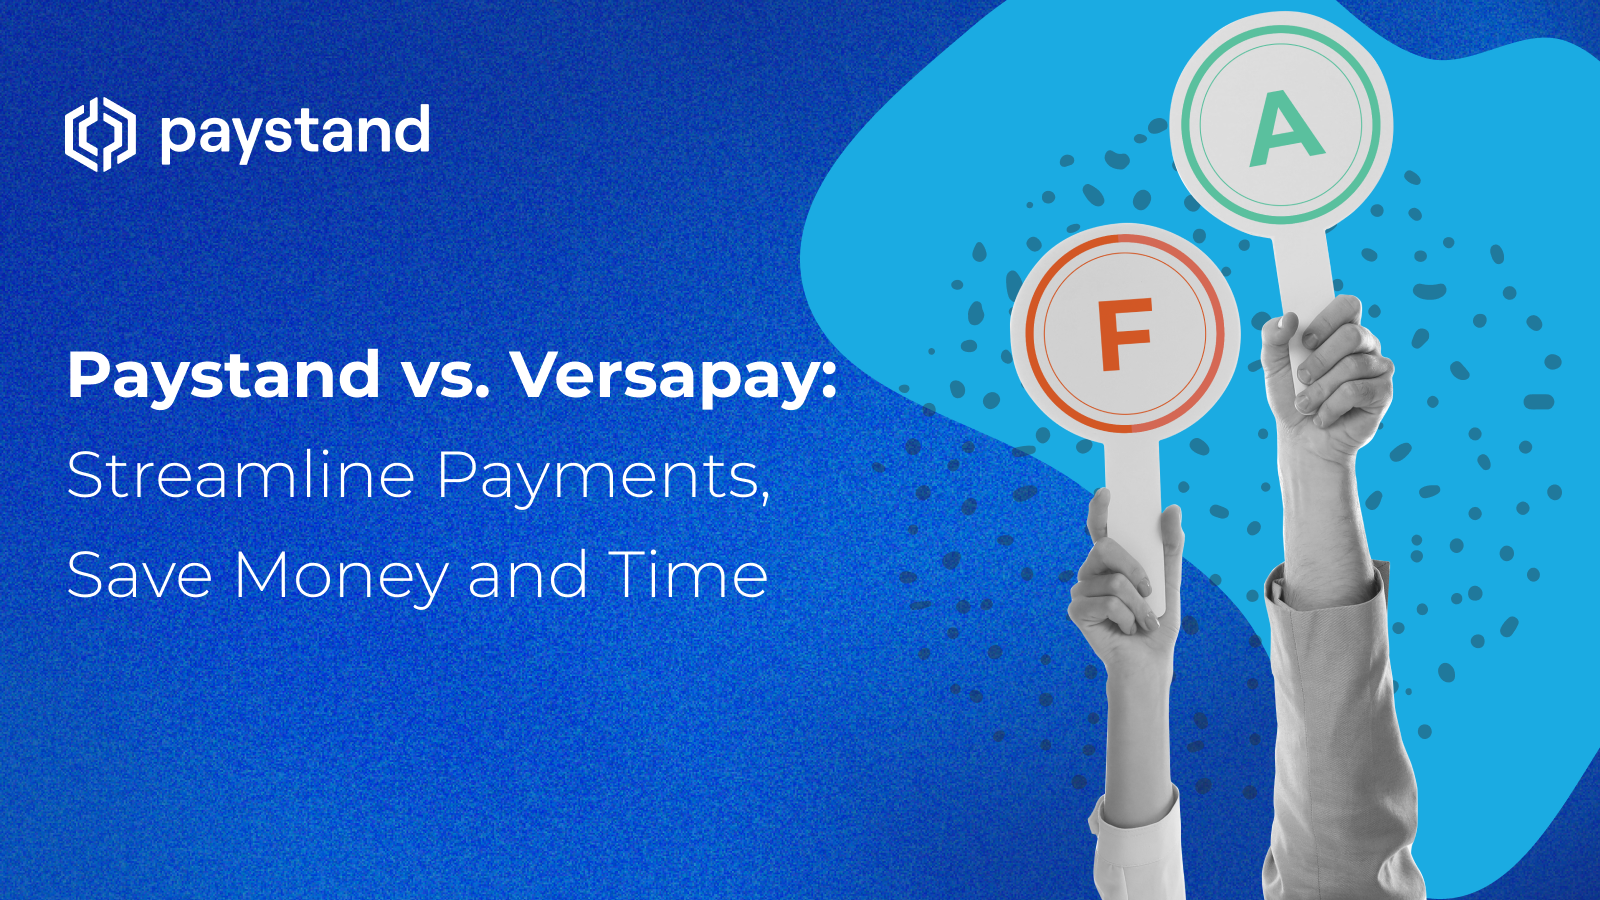 Paystand vs. Versapay: Streamline Payments, Save Money and Time